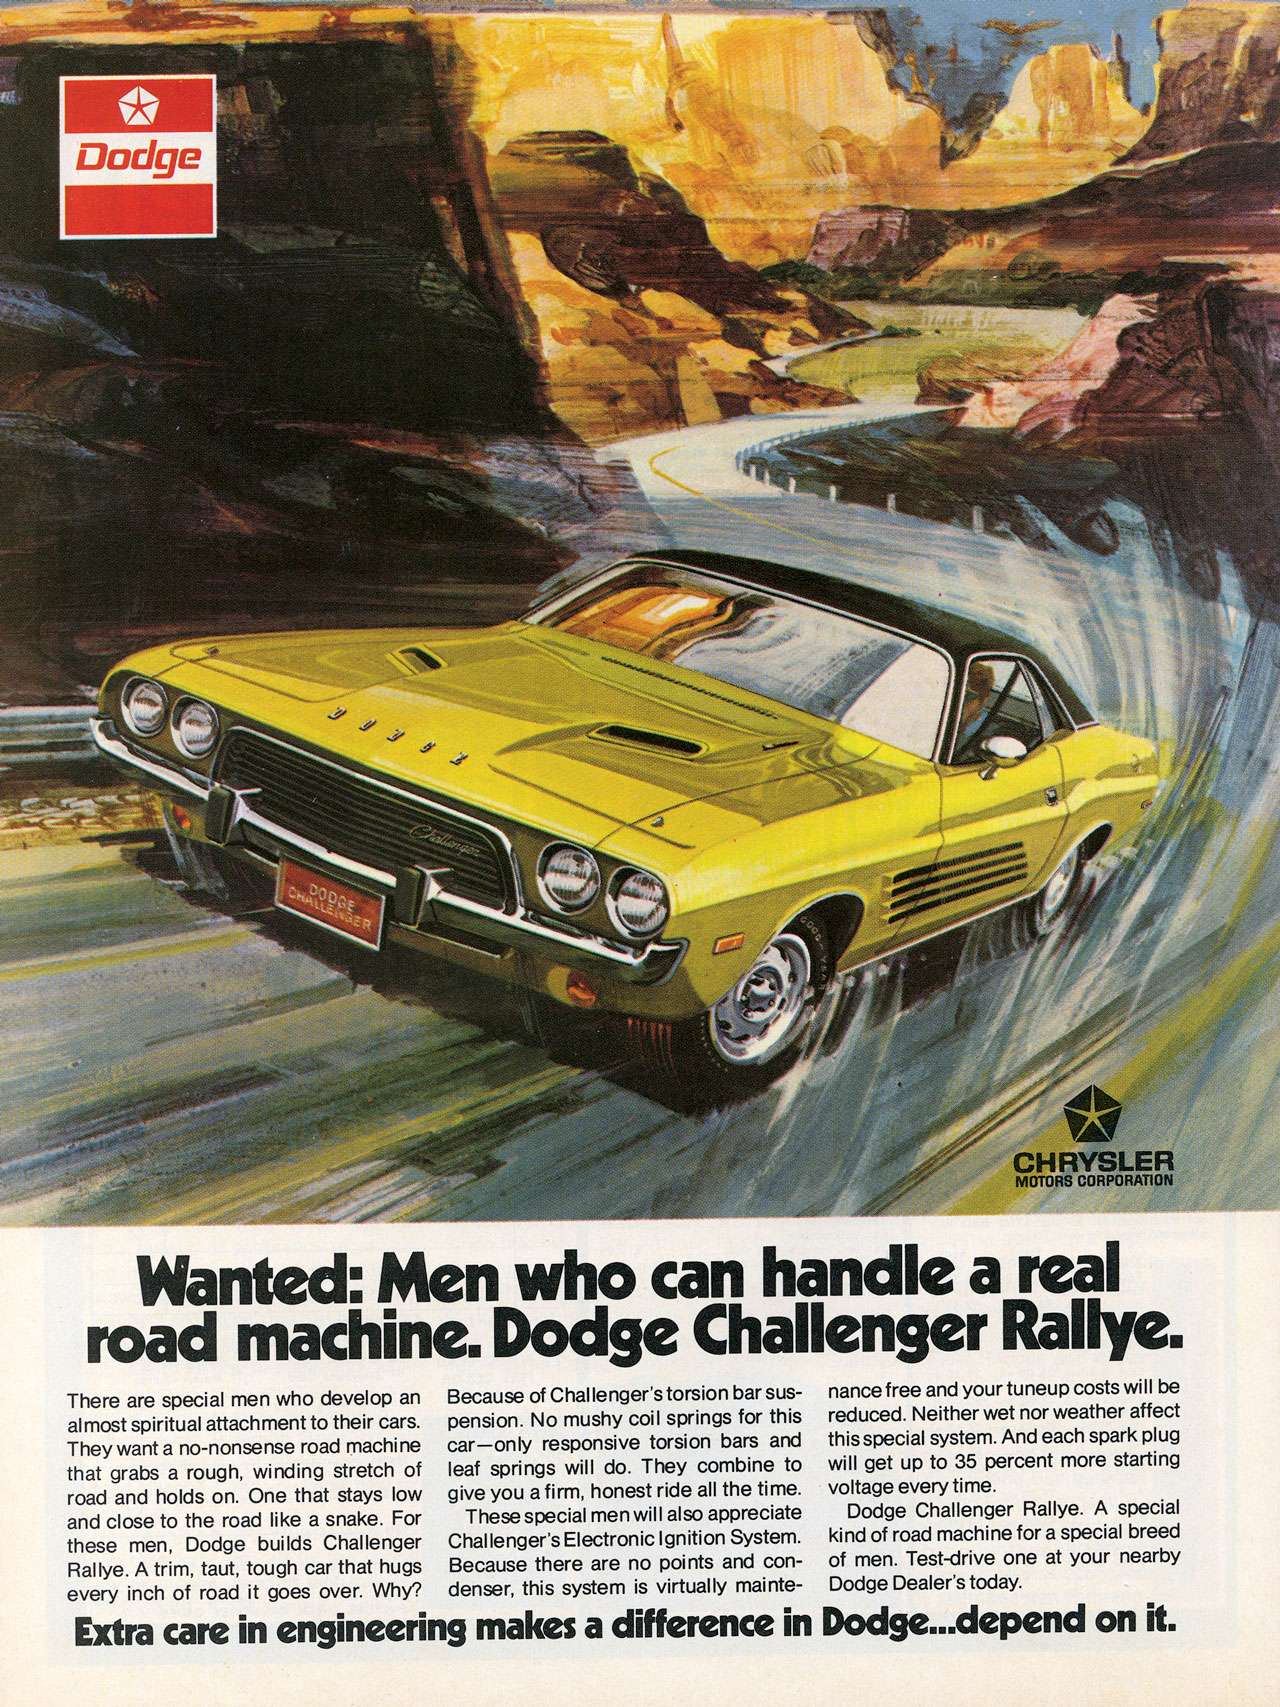 Wanted: Men who can handle a real road machine. Dodge Challenger Rallye. There are special men who develop an al most spiritual attachment to their cars. They want a no-nonsense road machine that grabs a rough, winding stretch of road and holds on. One that stays low and close to the road like a snake. For these men, Dodge builds Challenger Rallye. A trim, taut, tough car that hugs every inch of road it goes over. Why? Because of Challenger's torsion bar sus-pension. No mushy coil springs for this car—only responsive torsion bars and leaf springs will do. They combine to give you a firm, honest ride all the time These special men will also appreciate Challenger's Electronic Ignition System. Because there are no points and con-denser, this system is virtually maintenance free and your tuneup costs will be reduced. Neither wet nor weather affect this special system. And each spark plug will get up to 35 percent more starting voltage every time. Dodge Challenger Rallye. A special kind of road machine for a special breed of men. Test-drive one at your nearby Dodge Dealer's today. Extra care in engineering makes a difference in Dodge... depend on it.